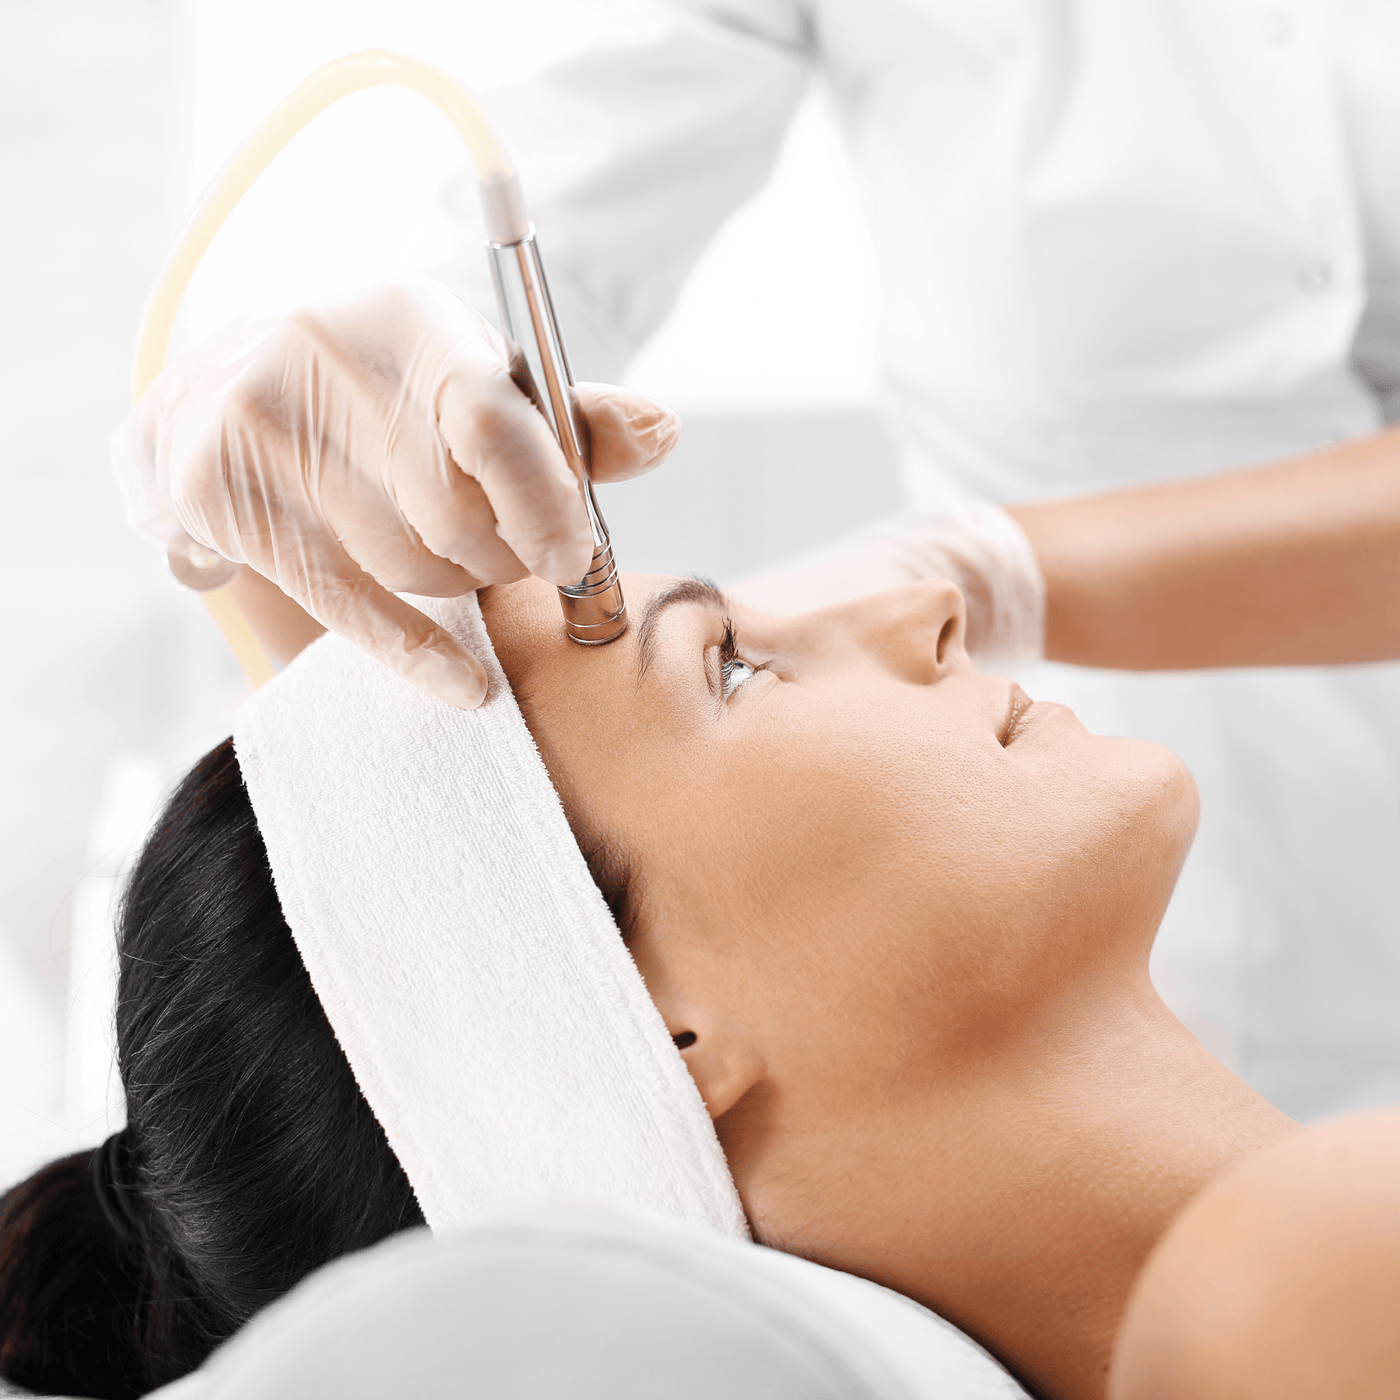 Microdermabrasion Course Editable Training Manual - The London Brow Company